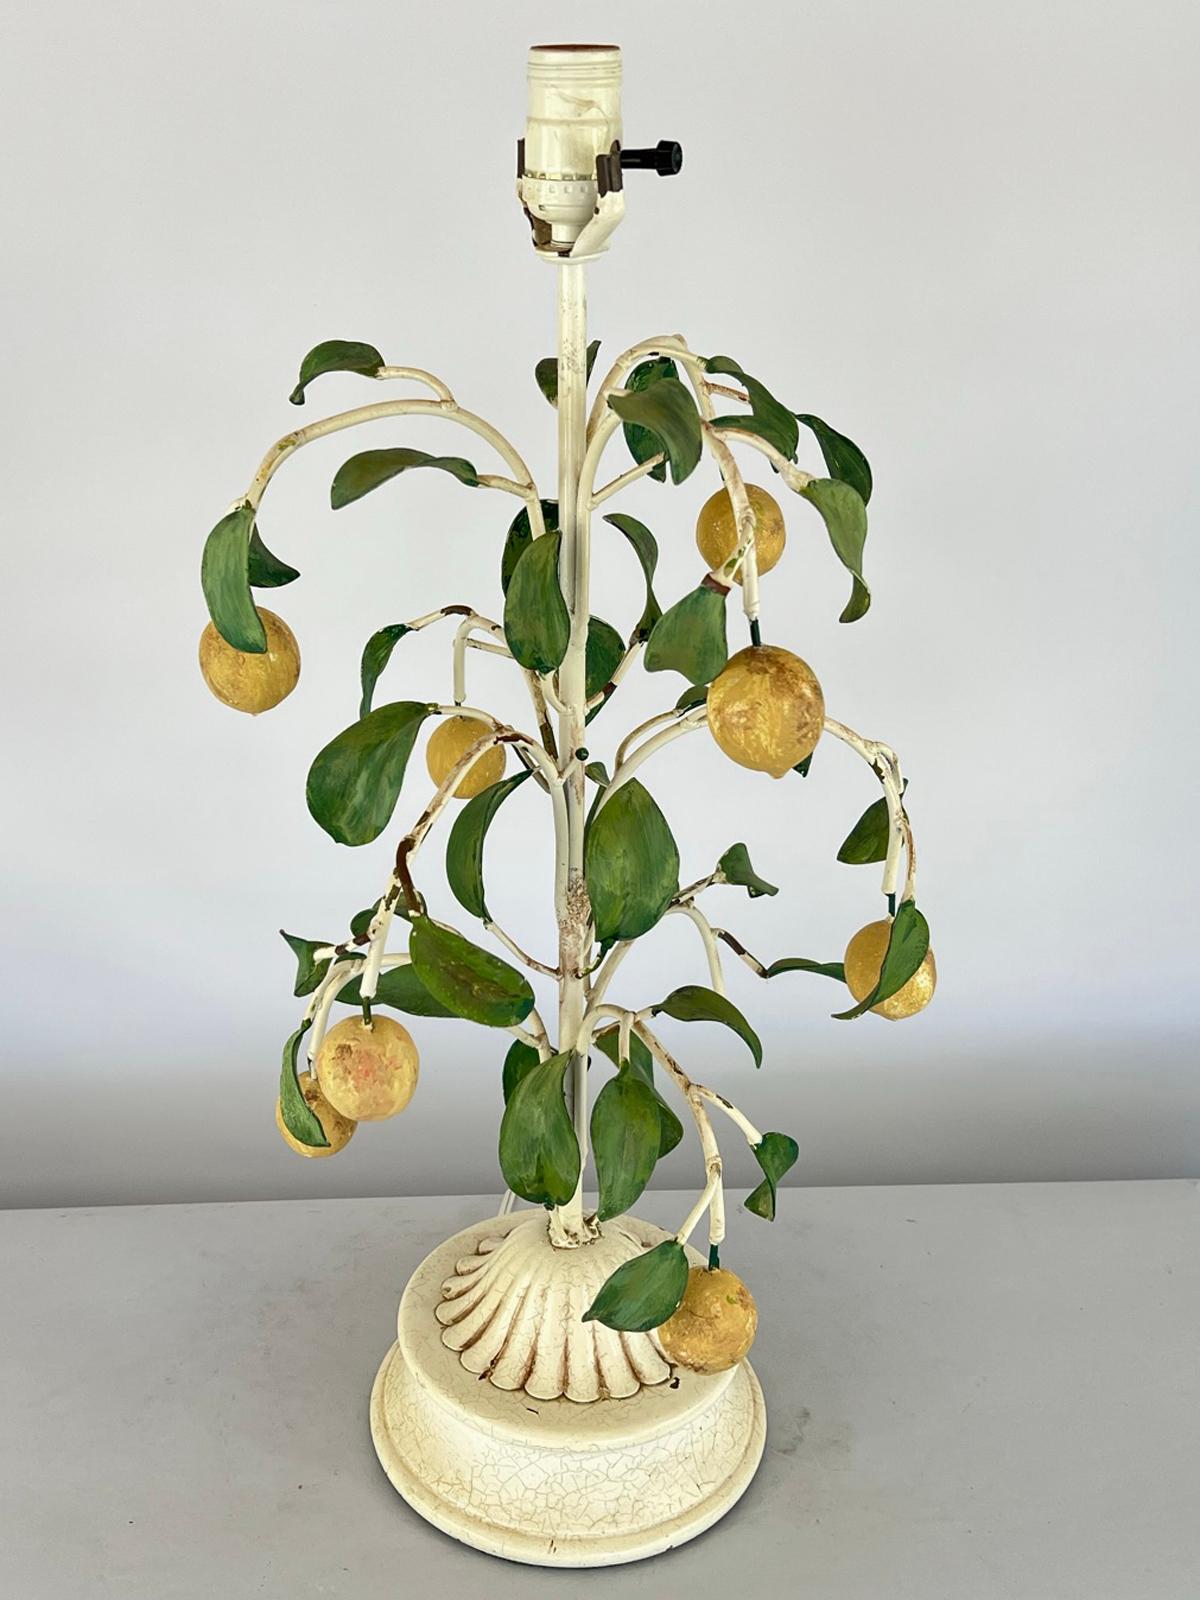 Vintage table lamp, of polychromed metal and composite, fashioned as a lemon tree with scrolling, foliate branches, lamped on round plinth. A matching finial is included. 

Stock ID: D3618.